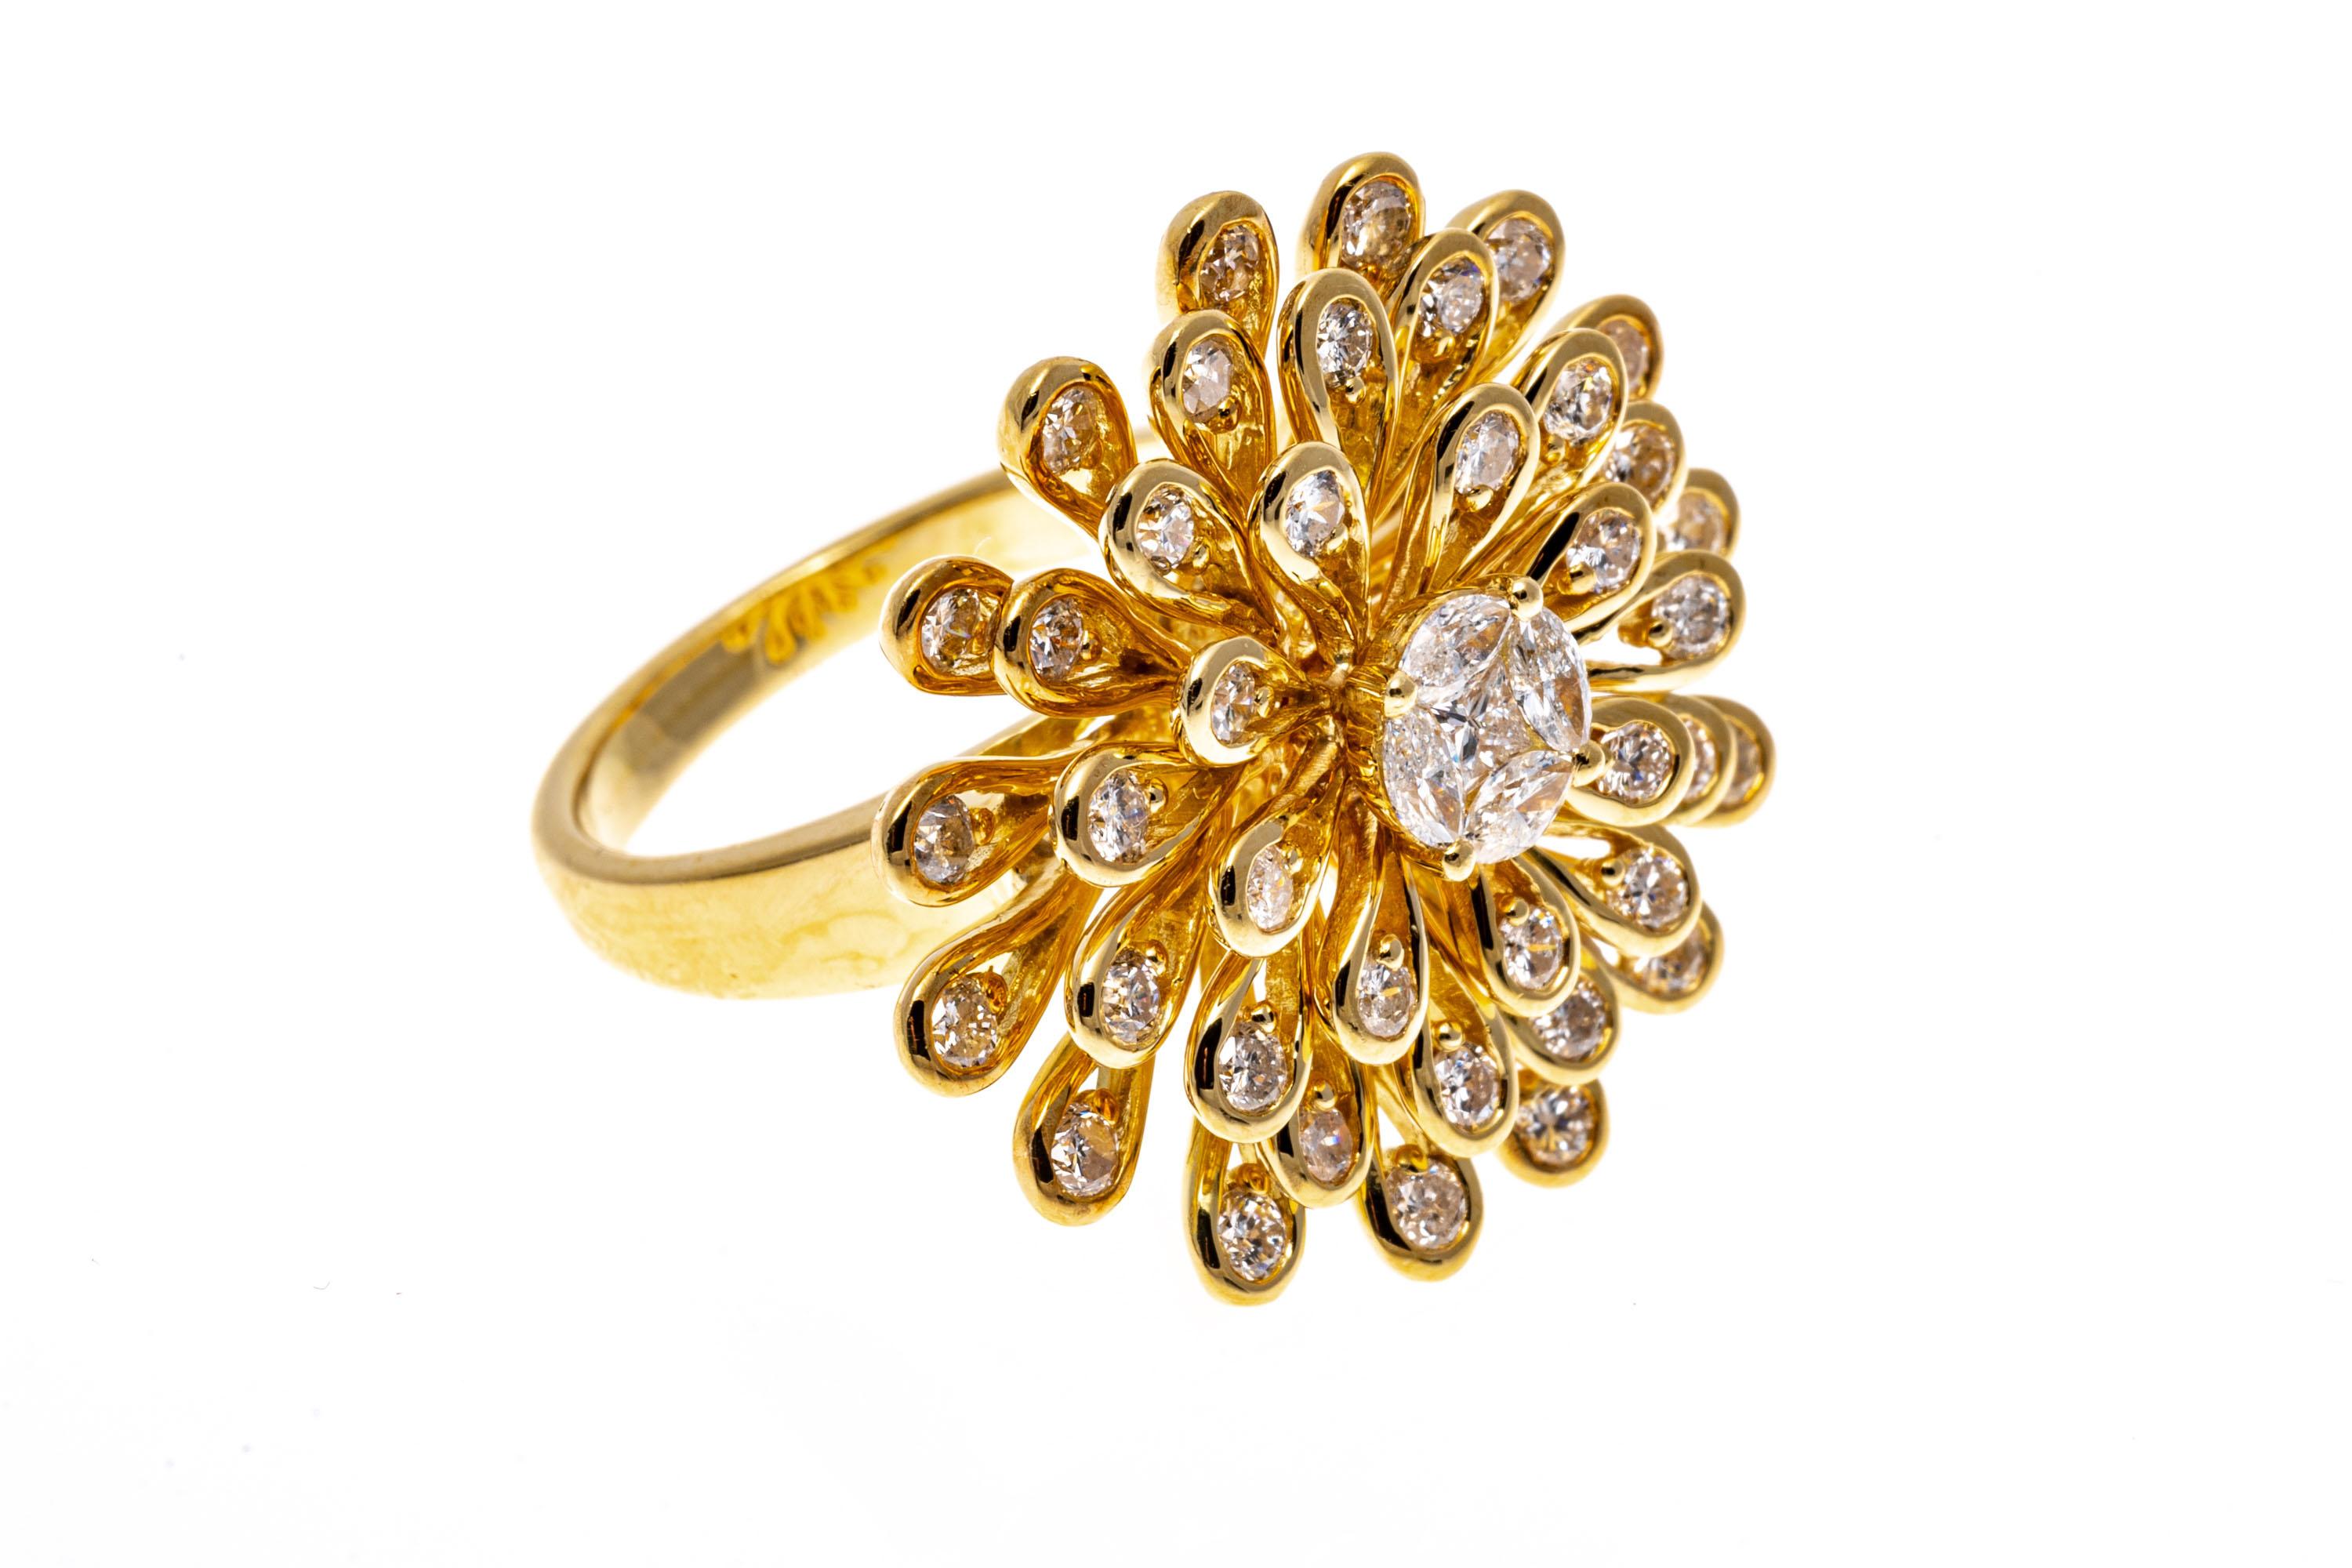 18k yellow gold ring. This delightful ring is a large zinnia flower motif, with a center featuring a princess cut diamonds, surrounded by four marquise brilliant diamonds, framed by a spray of petals, each set with a round brilliant cut diamond. The